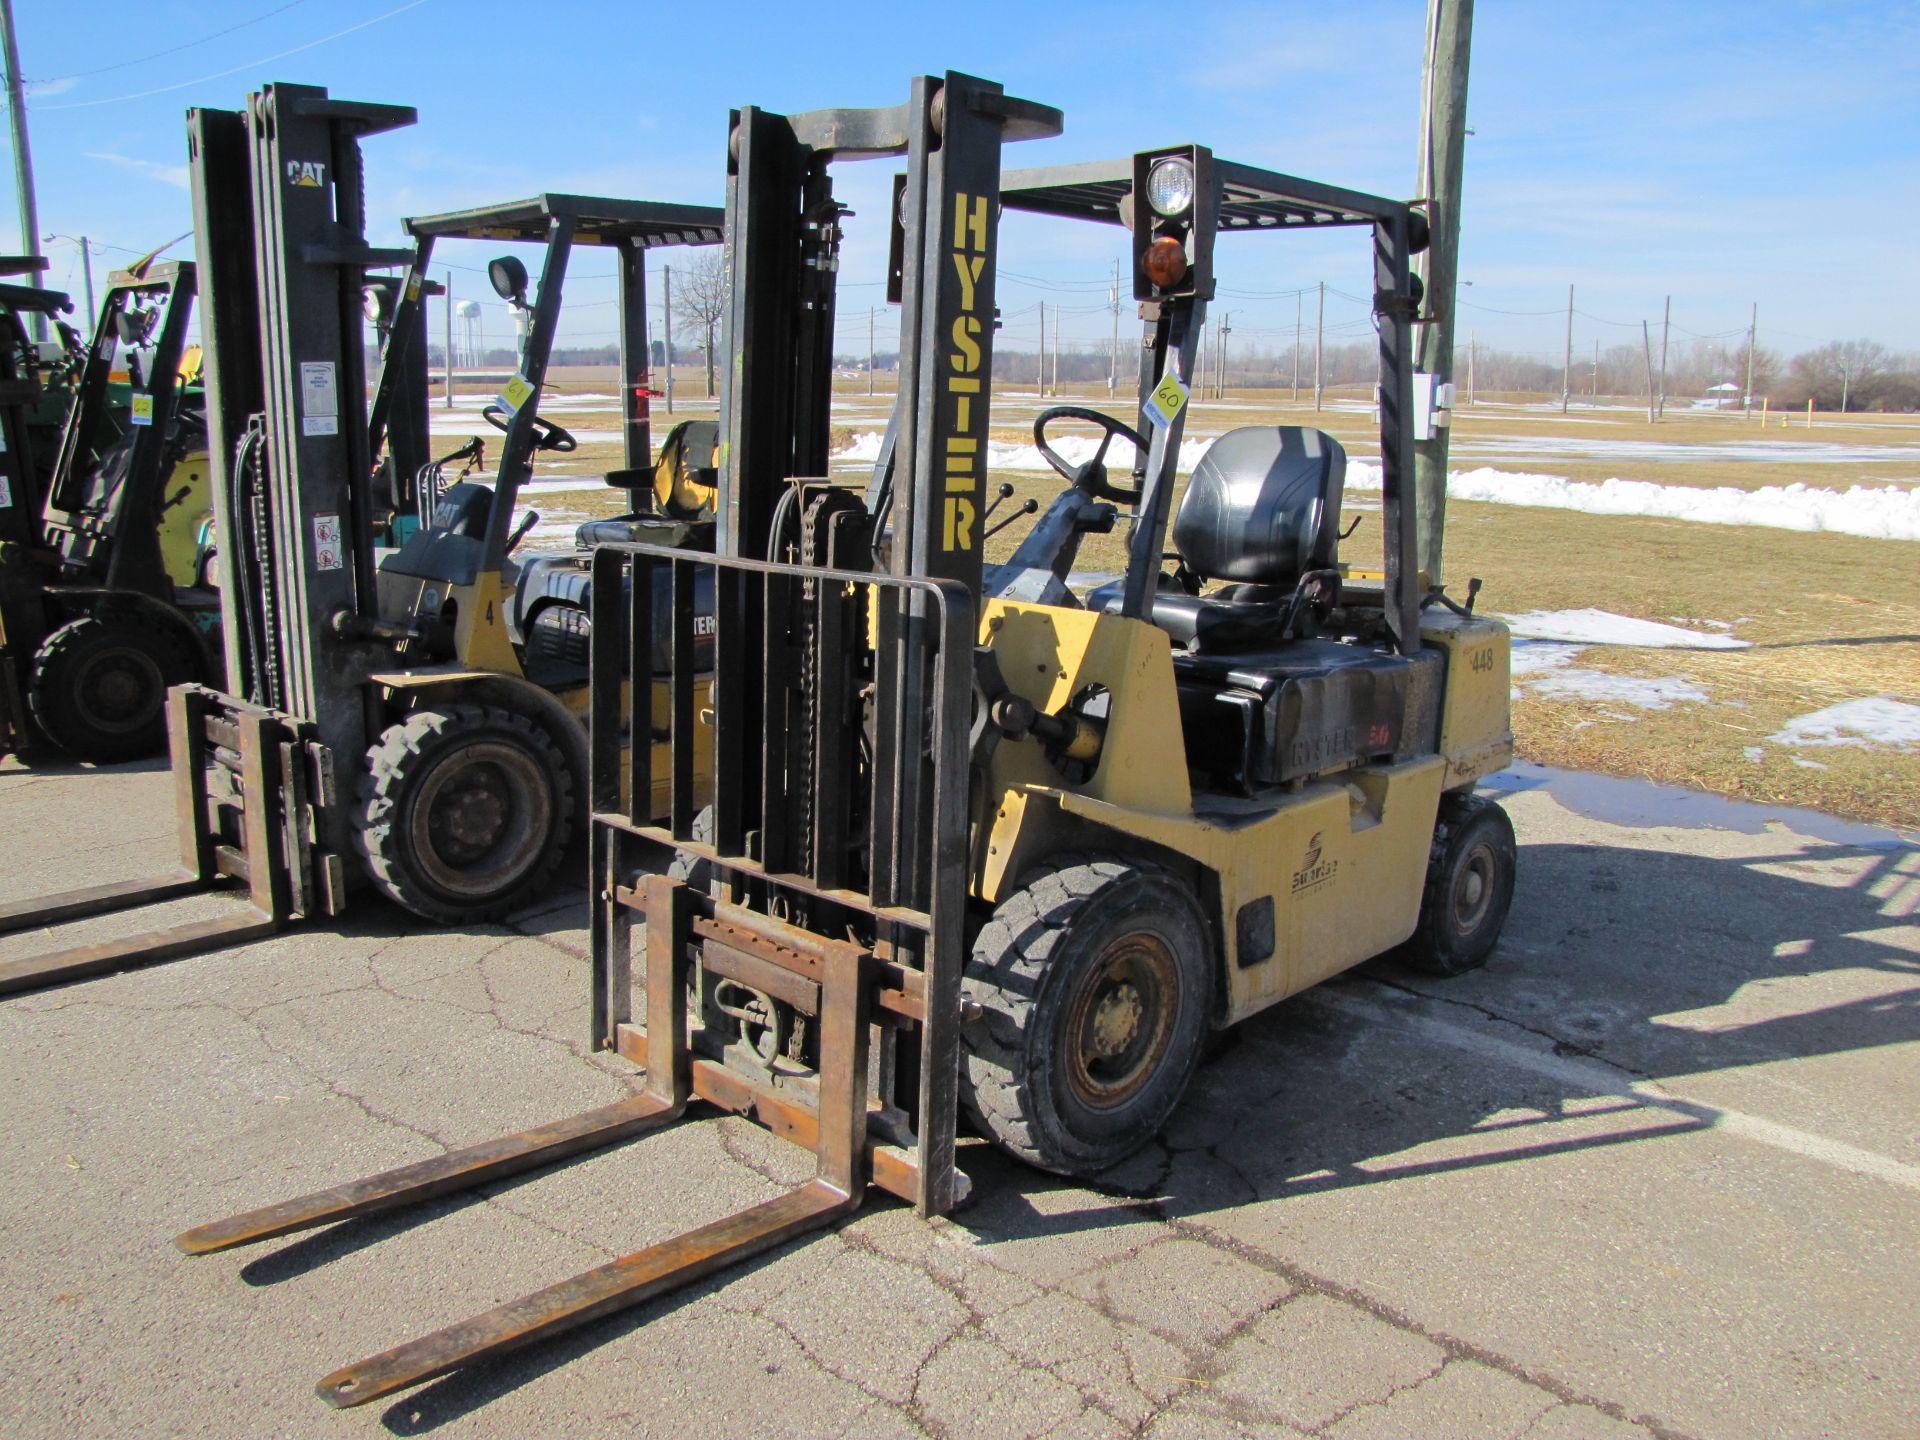 Hyster 50 forklift, 4500 lb capacity, propane, 3-stage, side shift, 7.00x12 fronts, 6.00x9 rears